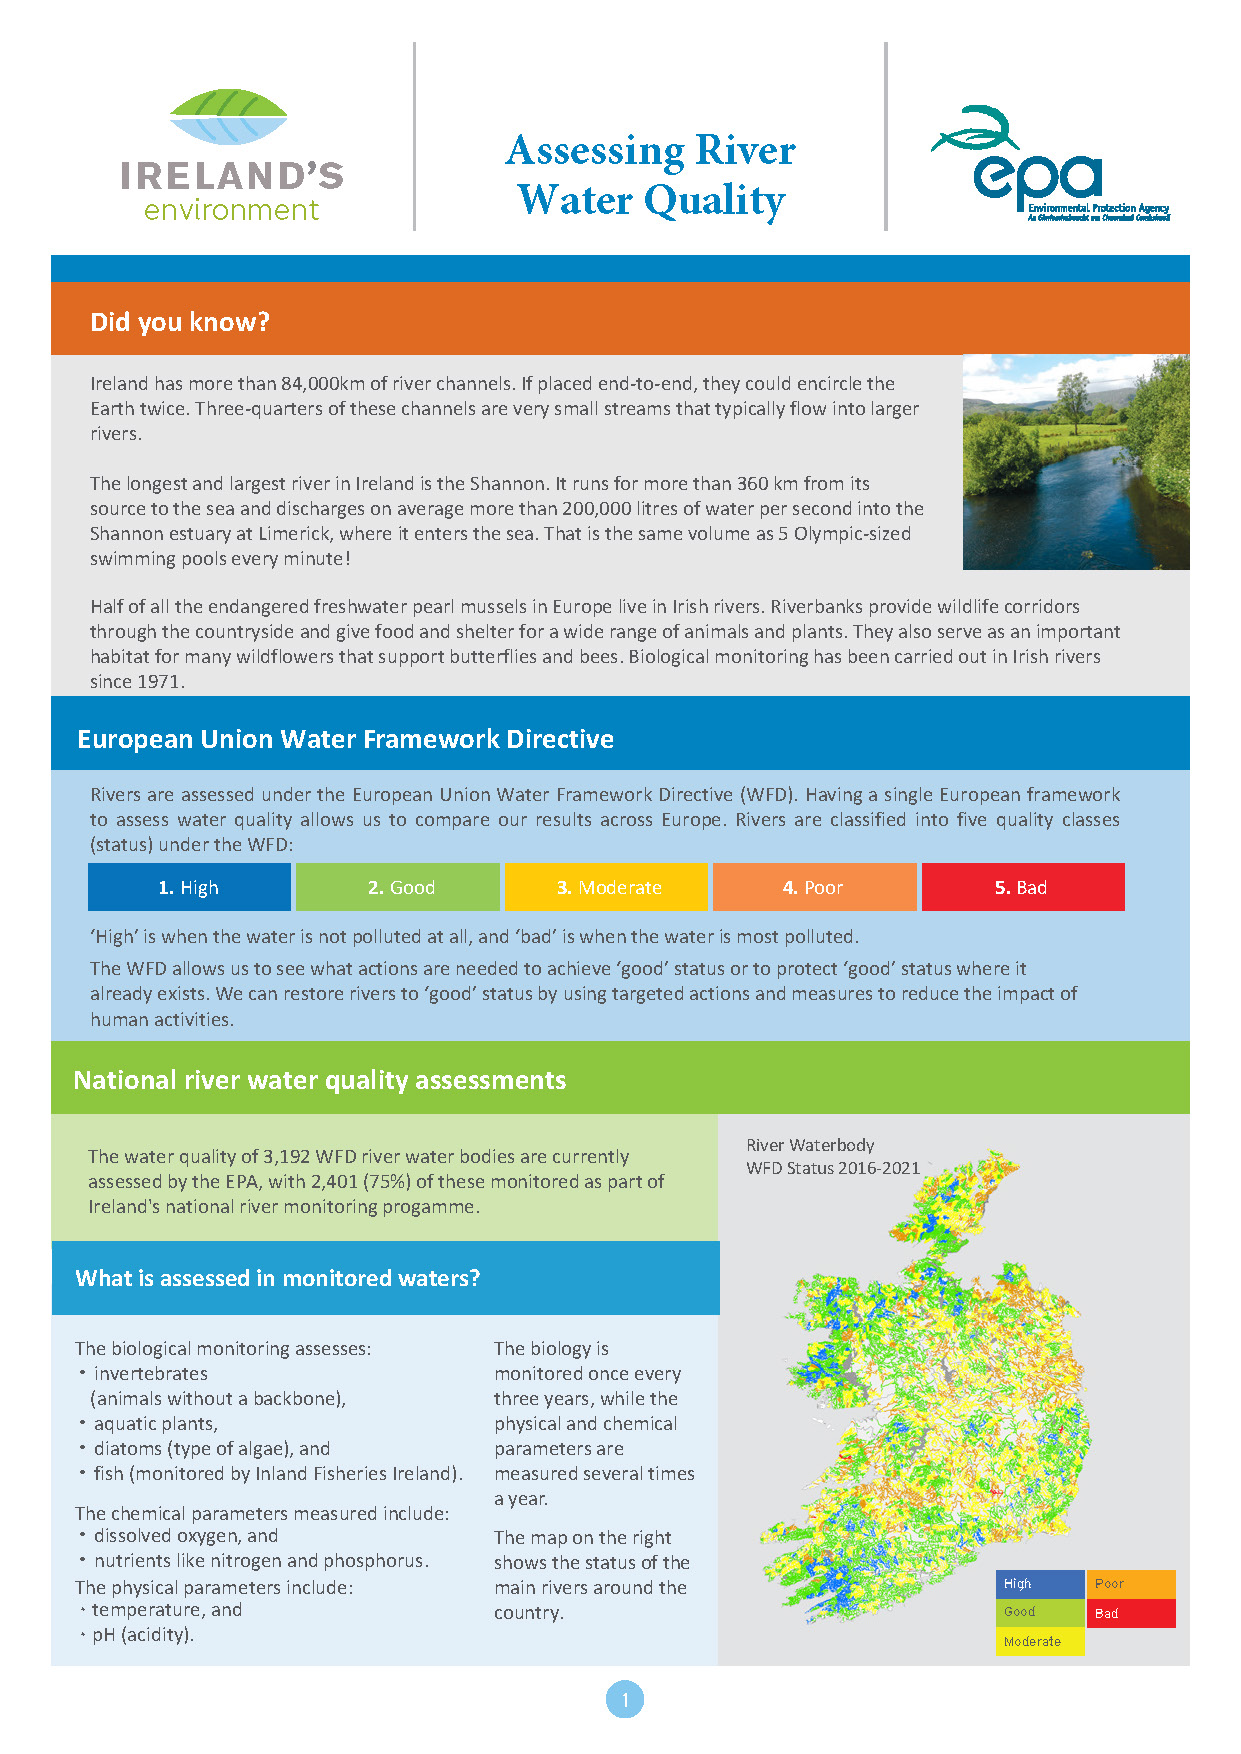 This is the first page of an EPA Fact Sheet on Assessing River Water Quality